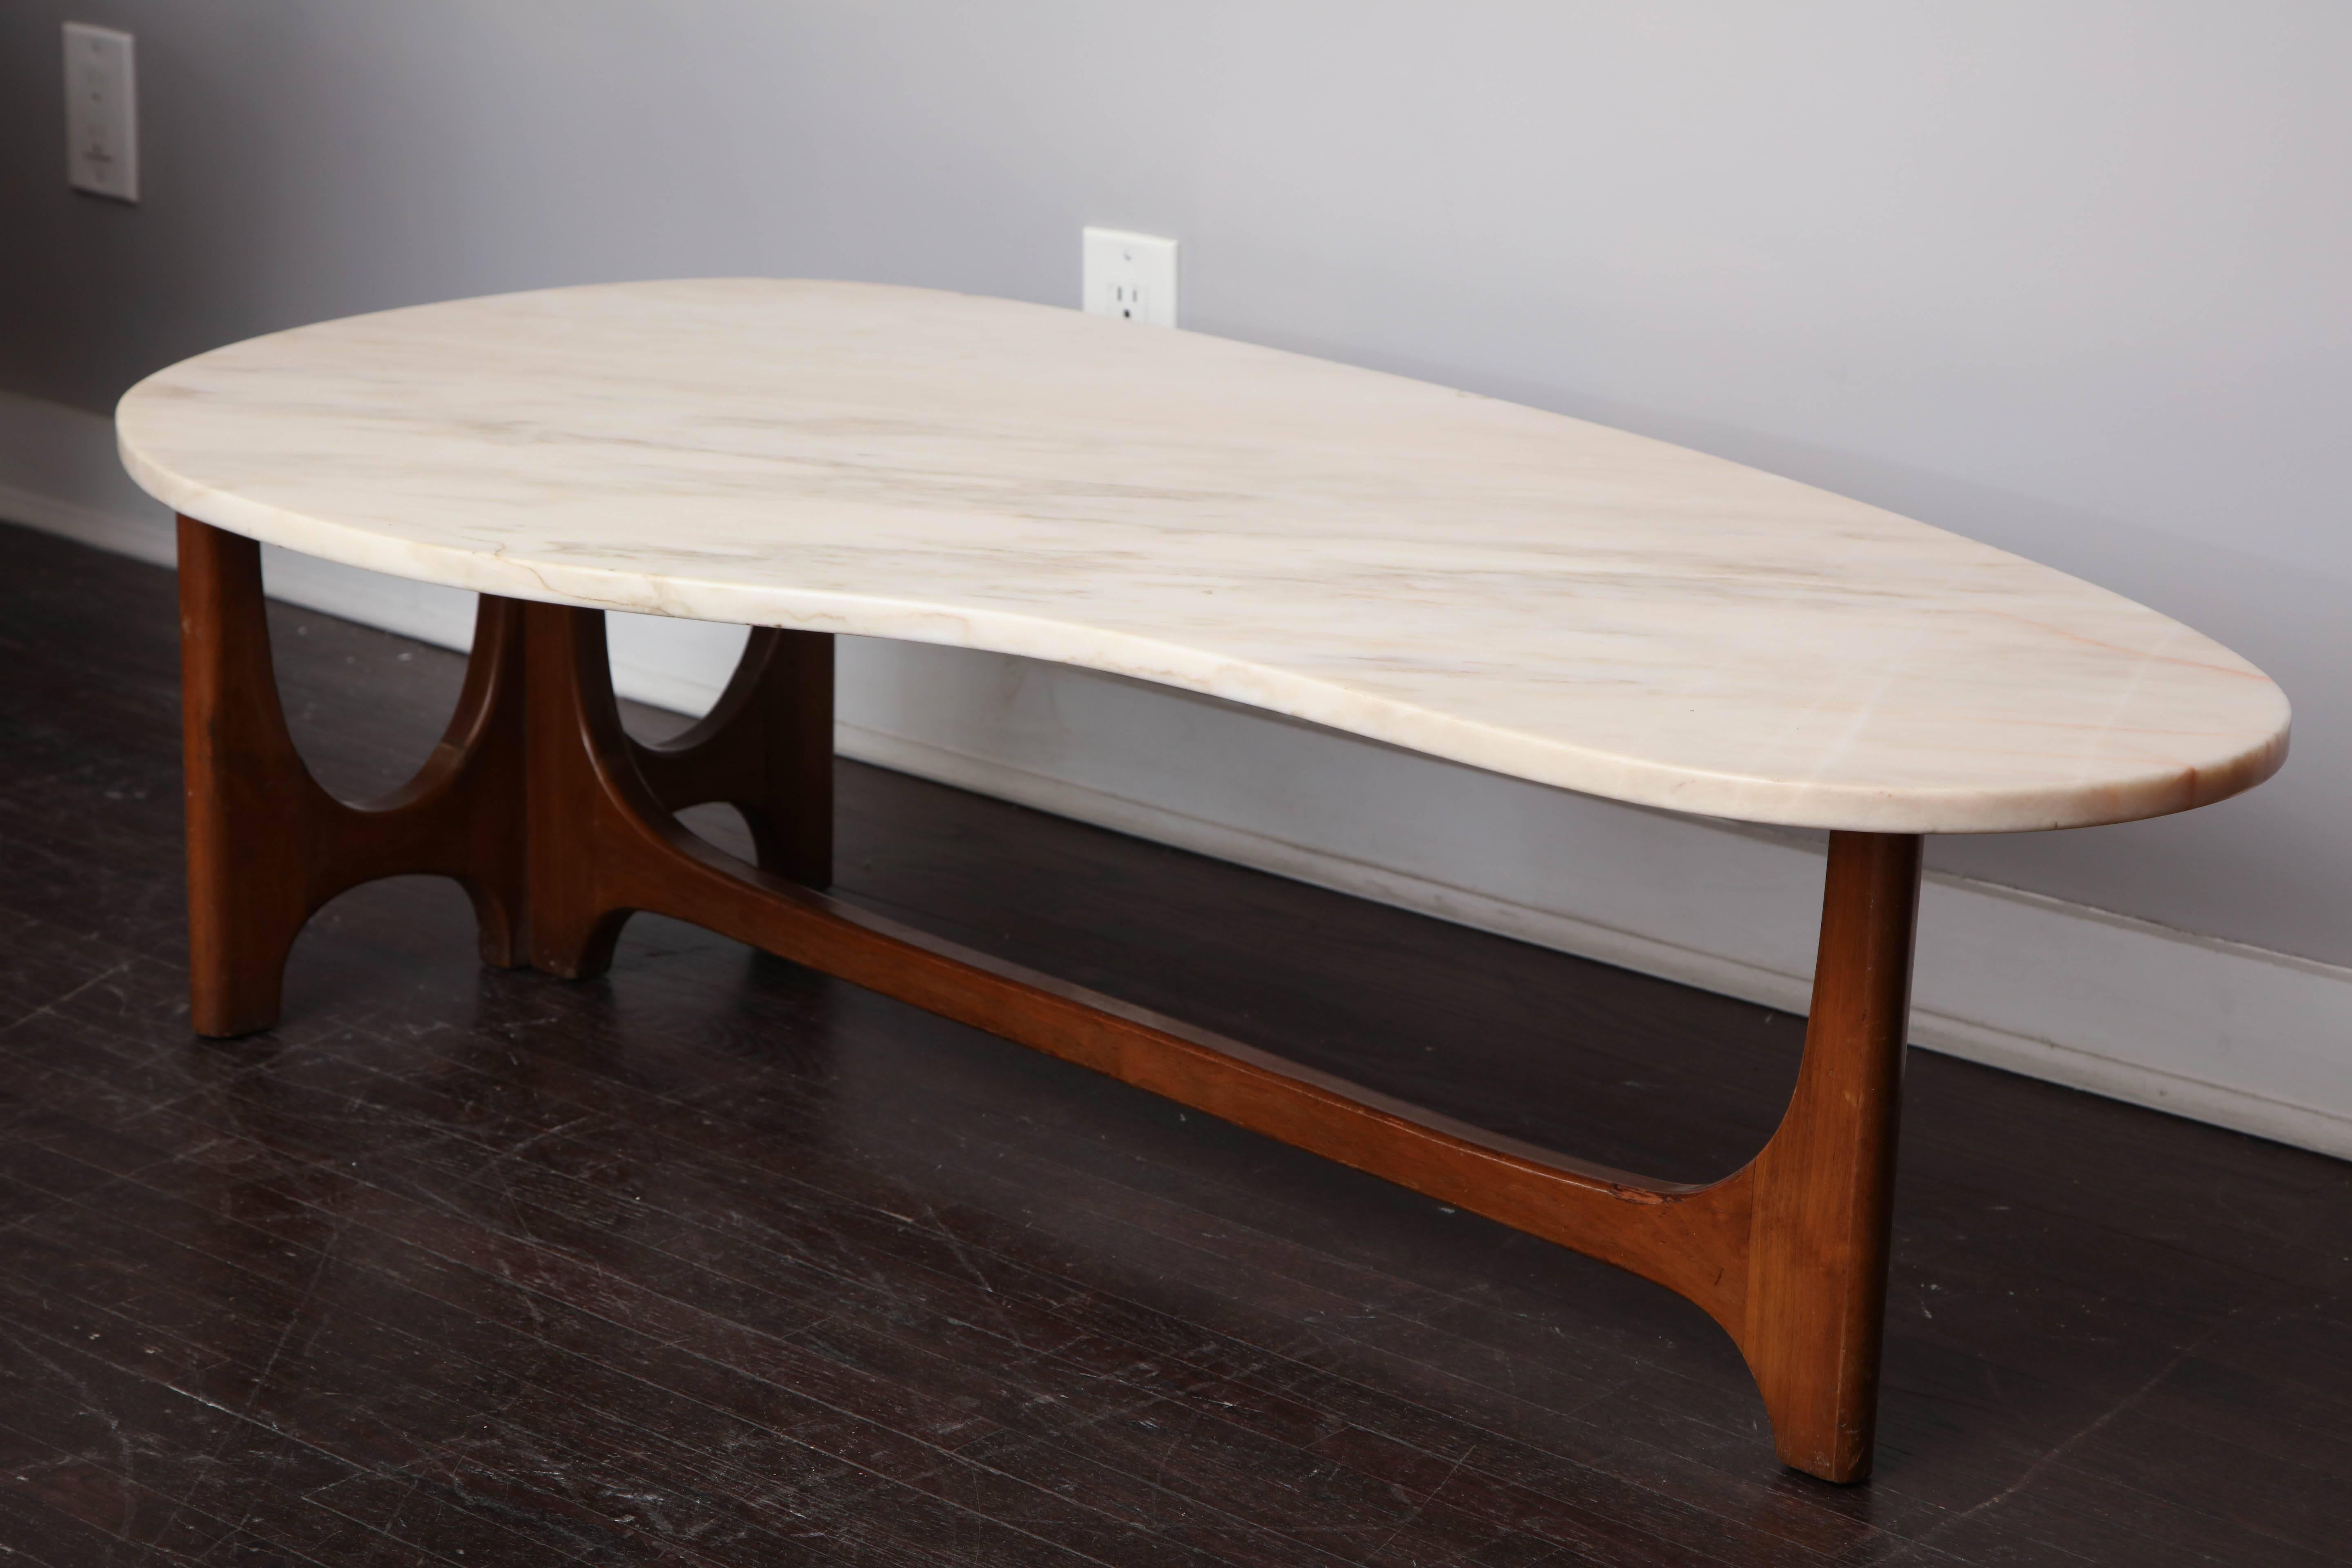 Vintage marble and walnut coffee table in the manner of Harve Probber. There are some minor blemishes such as nicks on the marble. This table is sold as is.